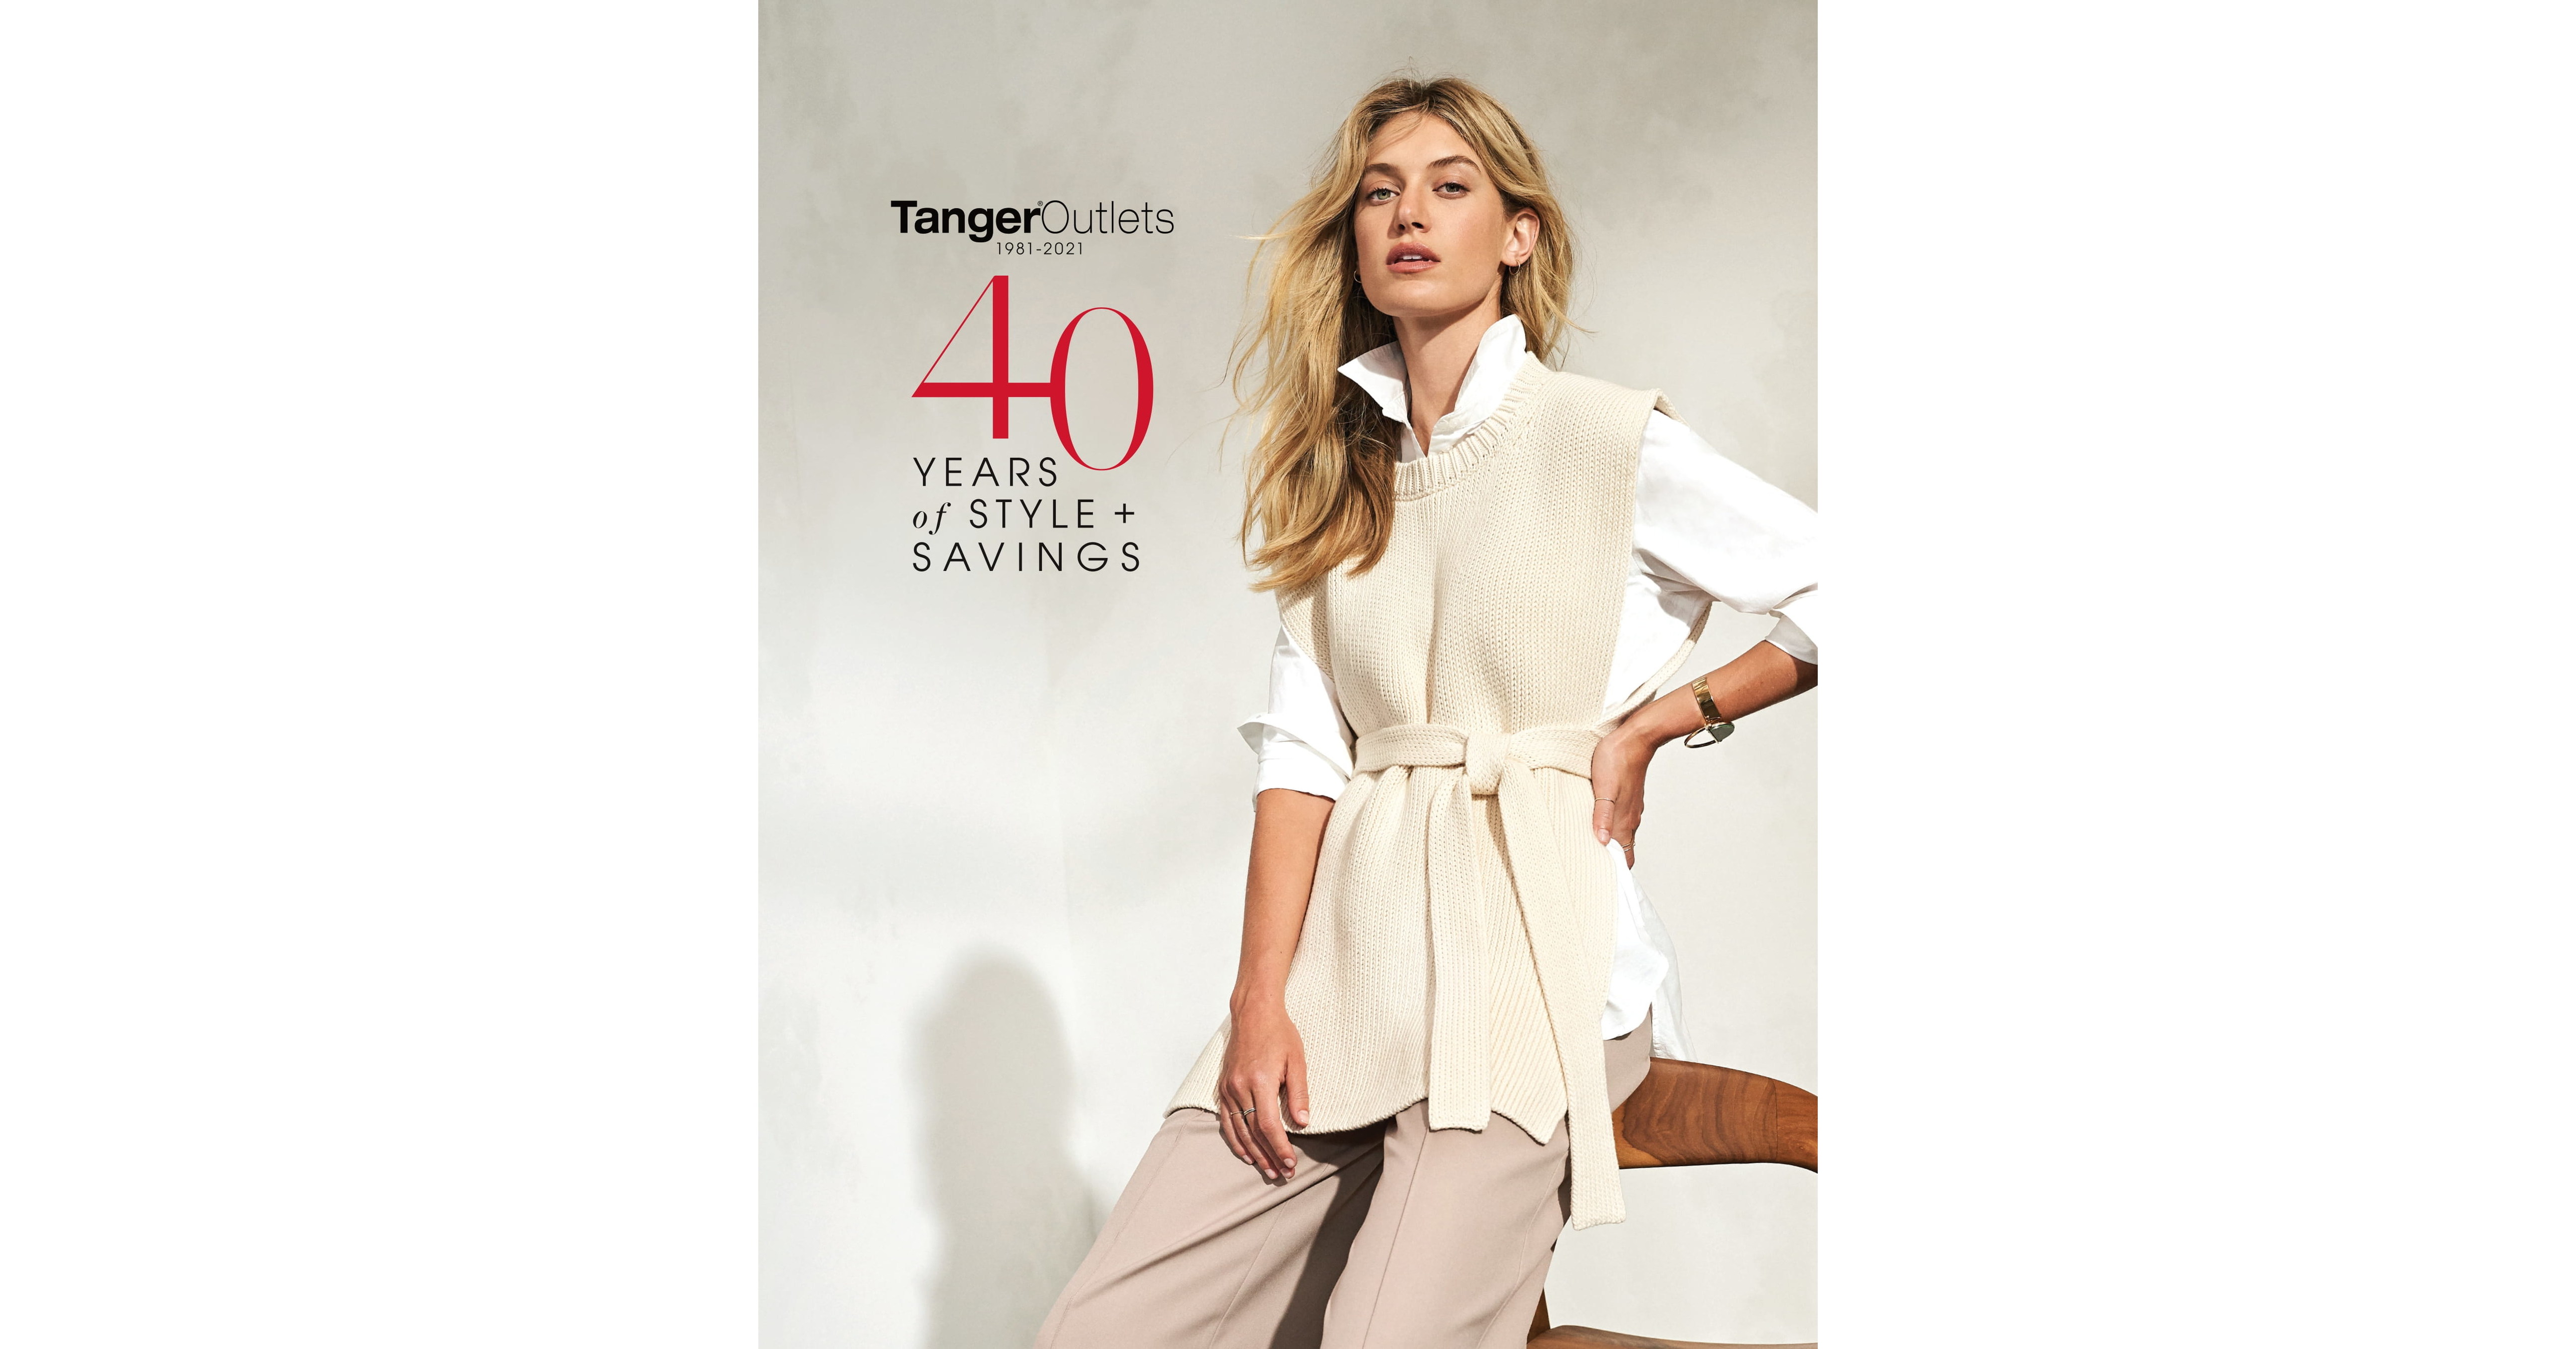 Tanger Outlets welcomes Designer Consignor, its first upscale